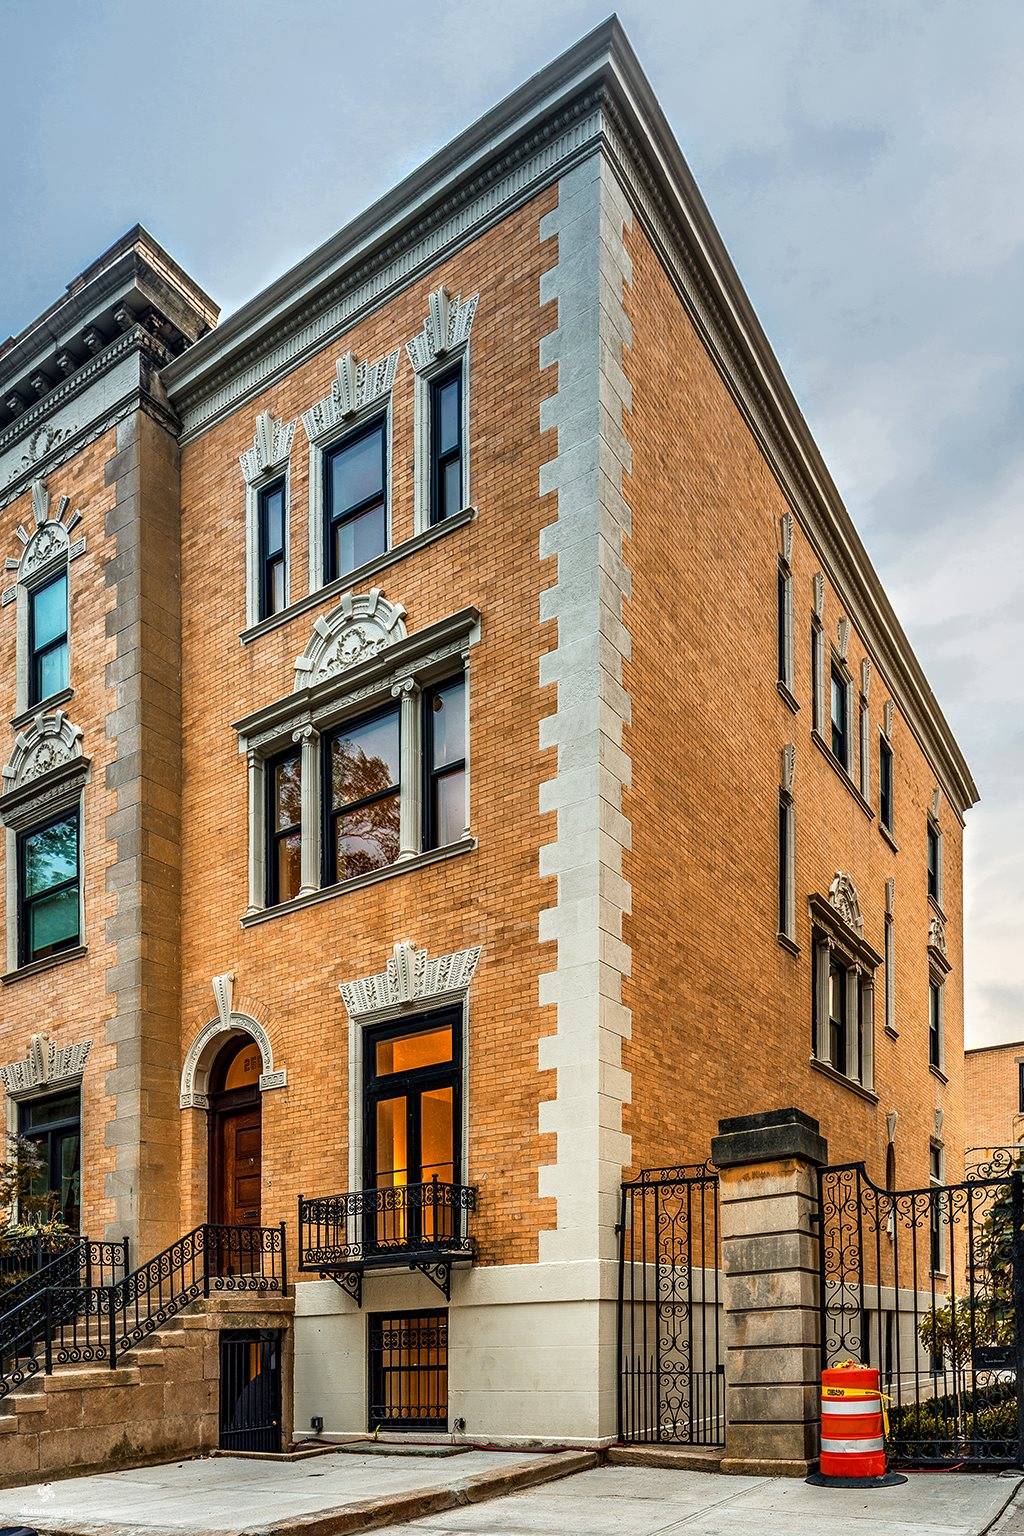 NO FEE + 1 MONTH FREE - Beautiful Striver's Row Townhouse 6 Bedrooms 5 Baths